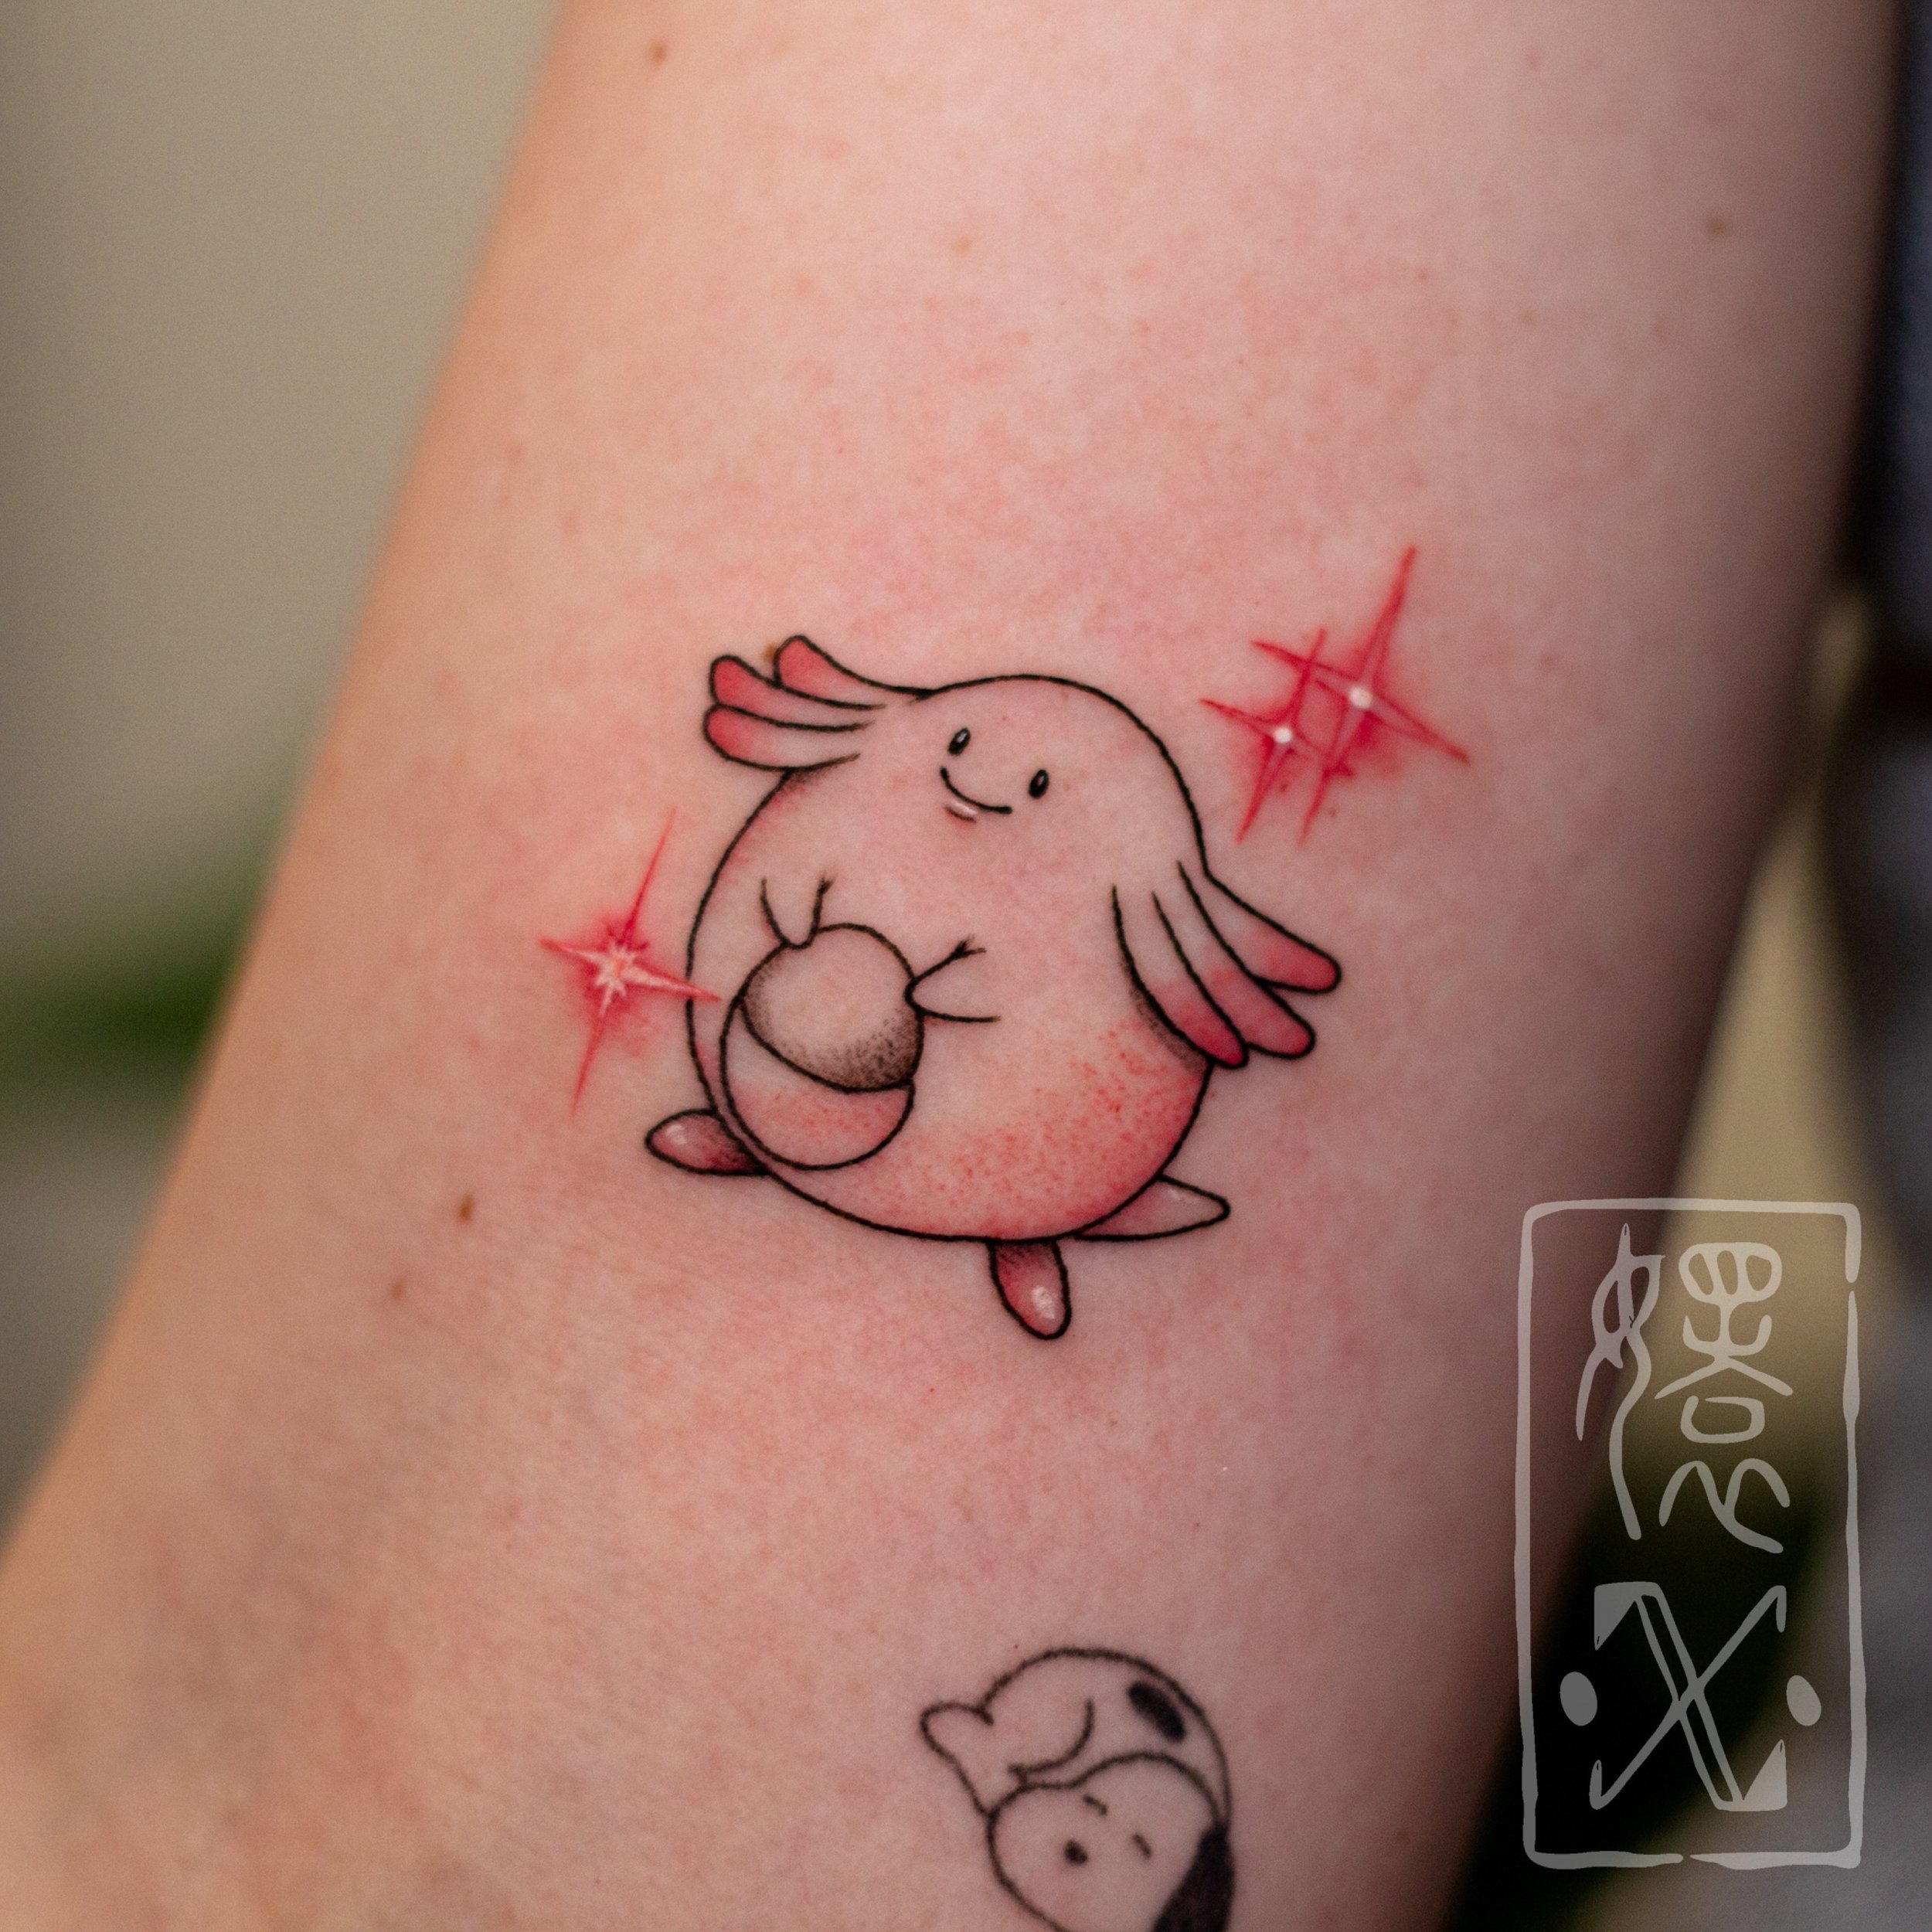 💞Tiny Chansey for Emily 🌸 the love Pok&eacute;mon. Do you guys think trainers in the Pok&eacute;mon universe have Pok&eacute;mon tattoos like we have animal tattoos?

My first Pok&eacute;mon game was Go and Arceus&hellip; it just seems like such a 